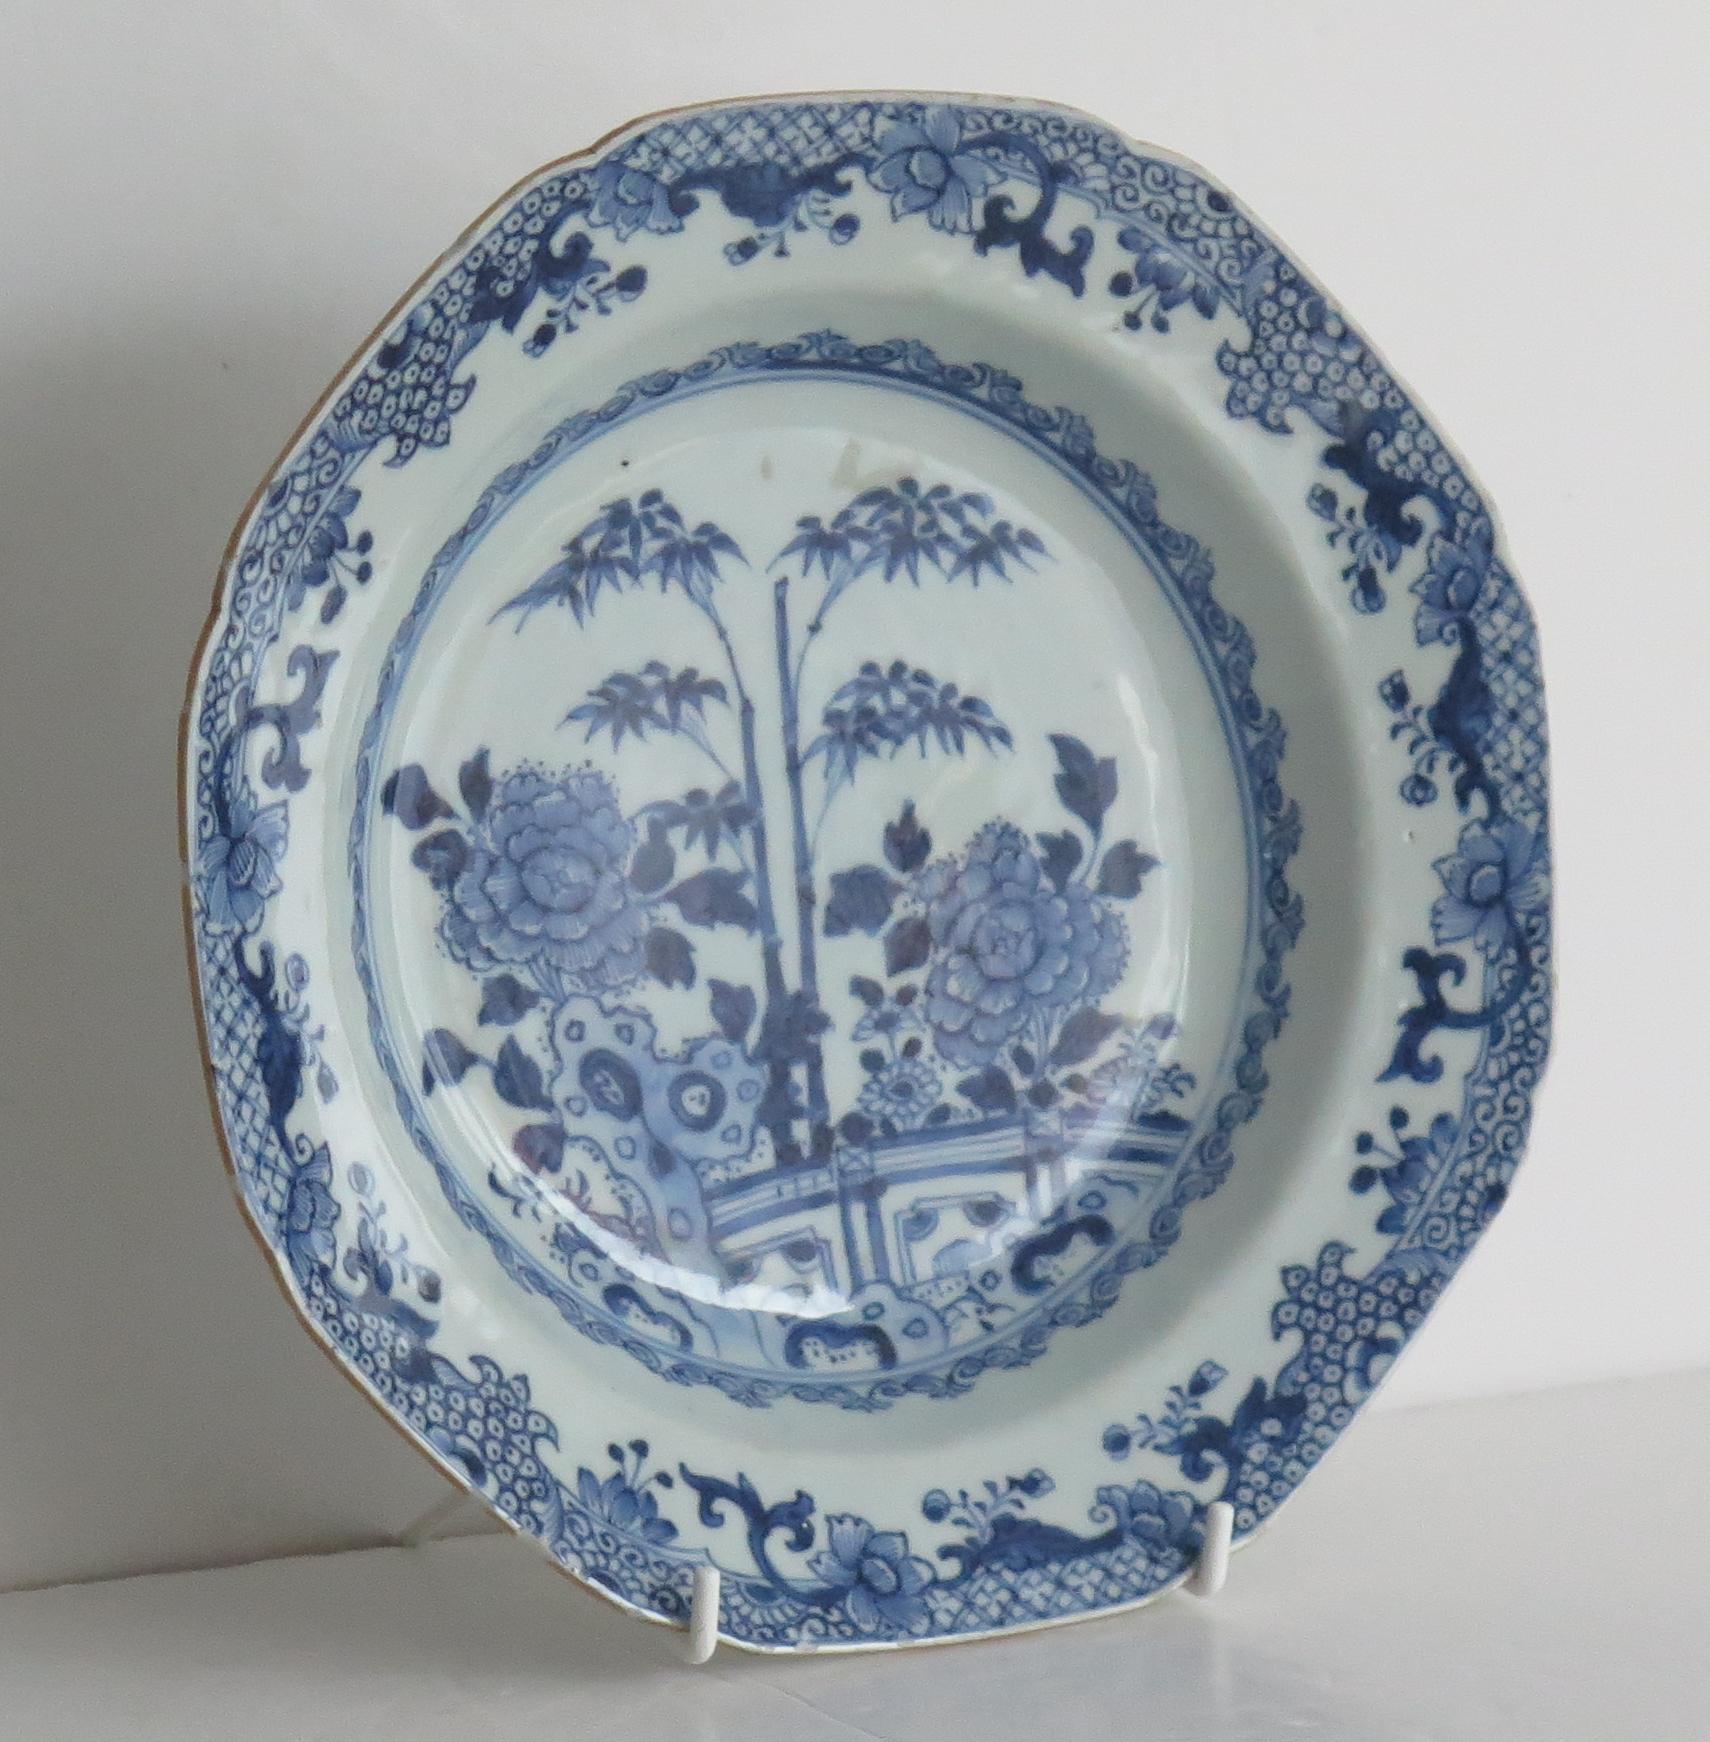 18th Century and Earlier Chinese Export Soup or Deep Plate Canton Blue & White Porcelain, Qing circa 1770